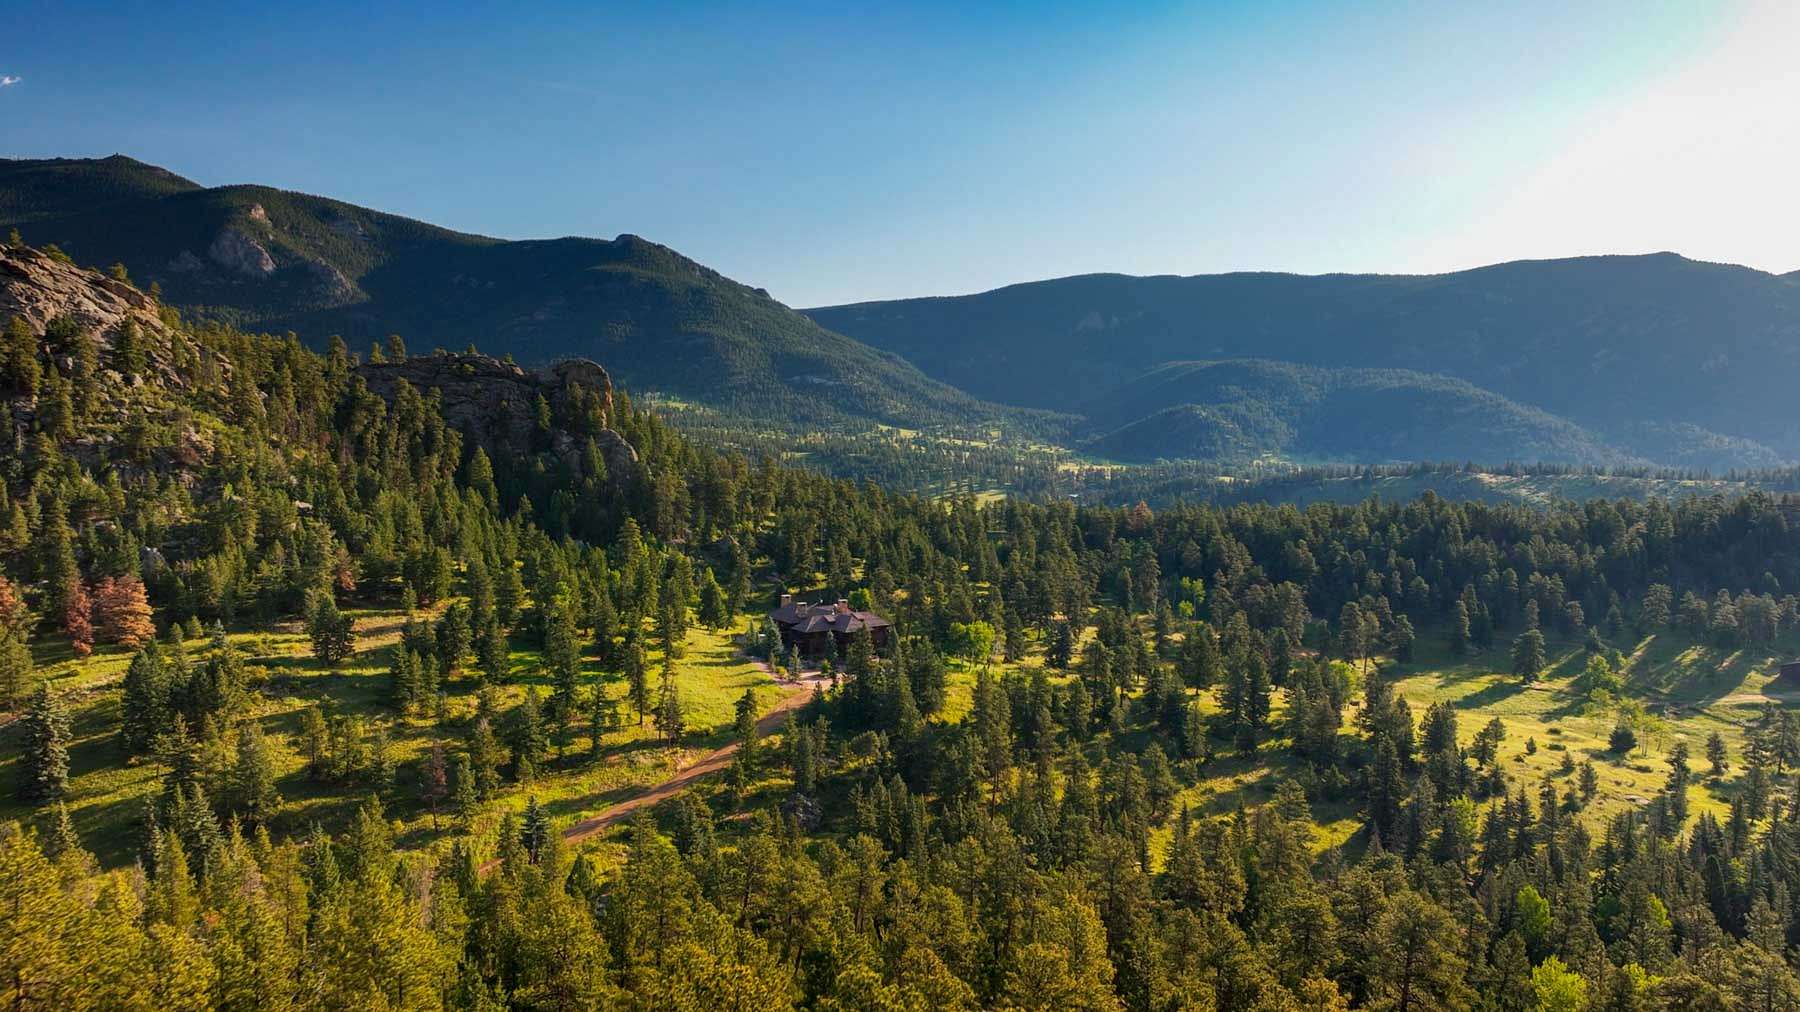 667 Acres of Improved Land for Sale in Evergreen, Colorado